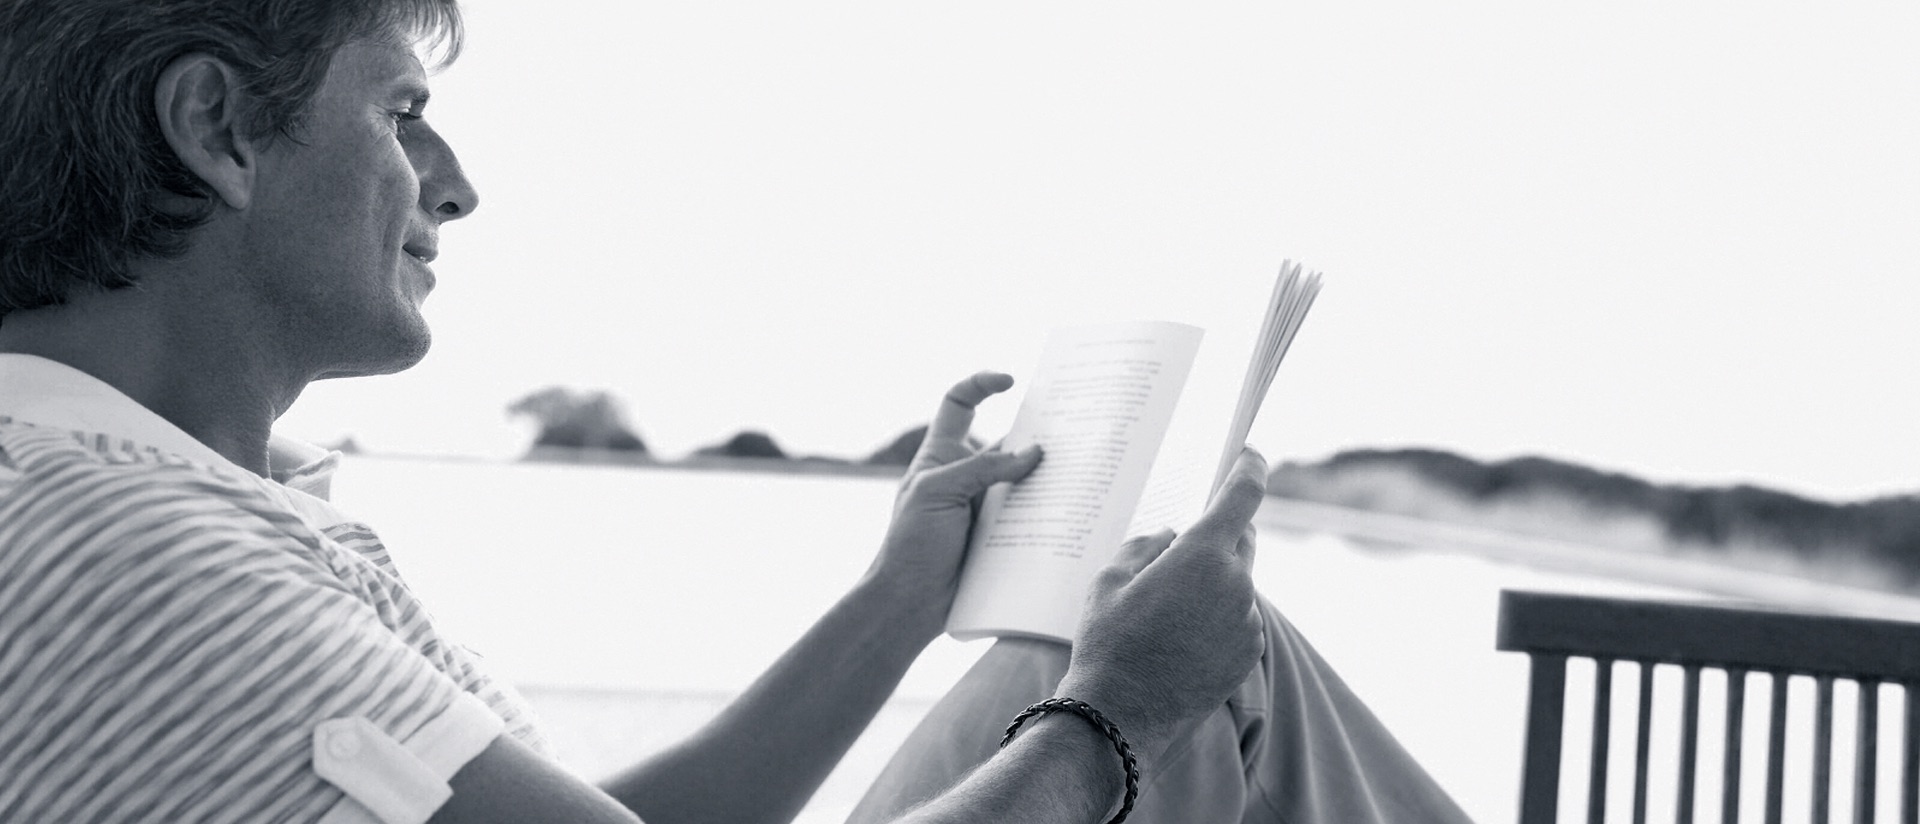 Moody Philosophy, black and white photograph, man reads book at beach